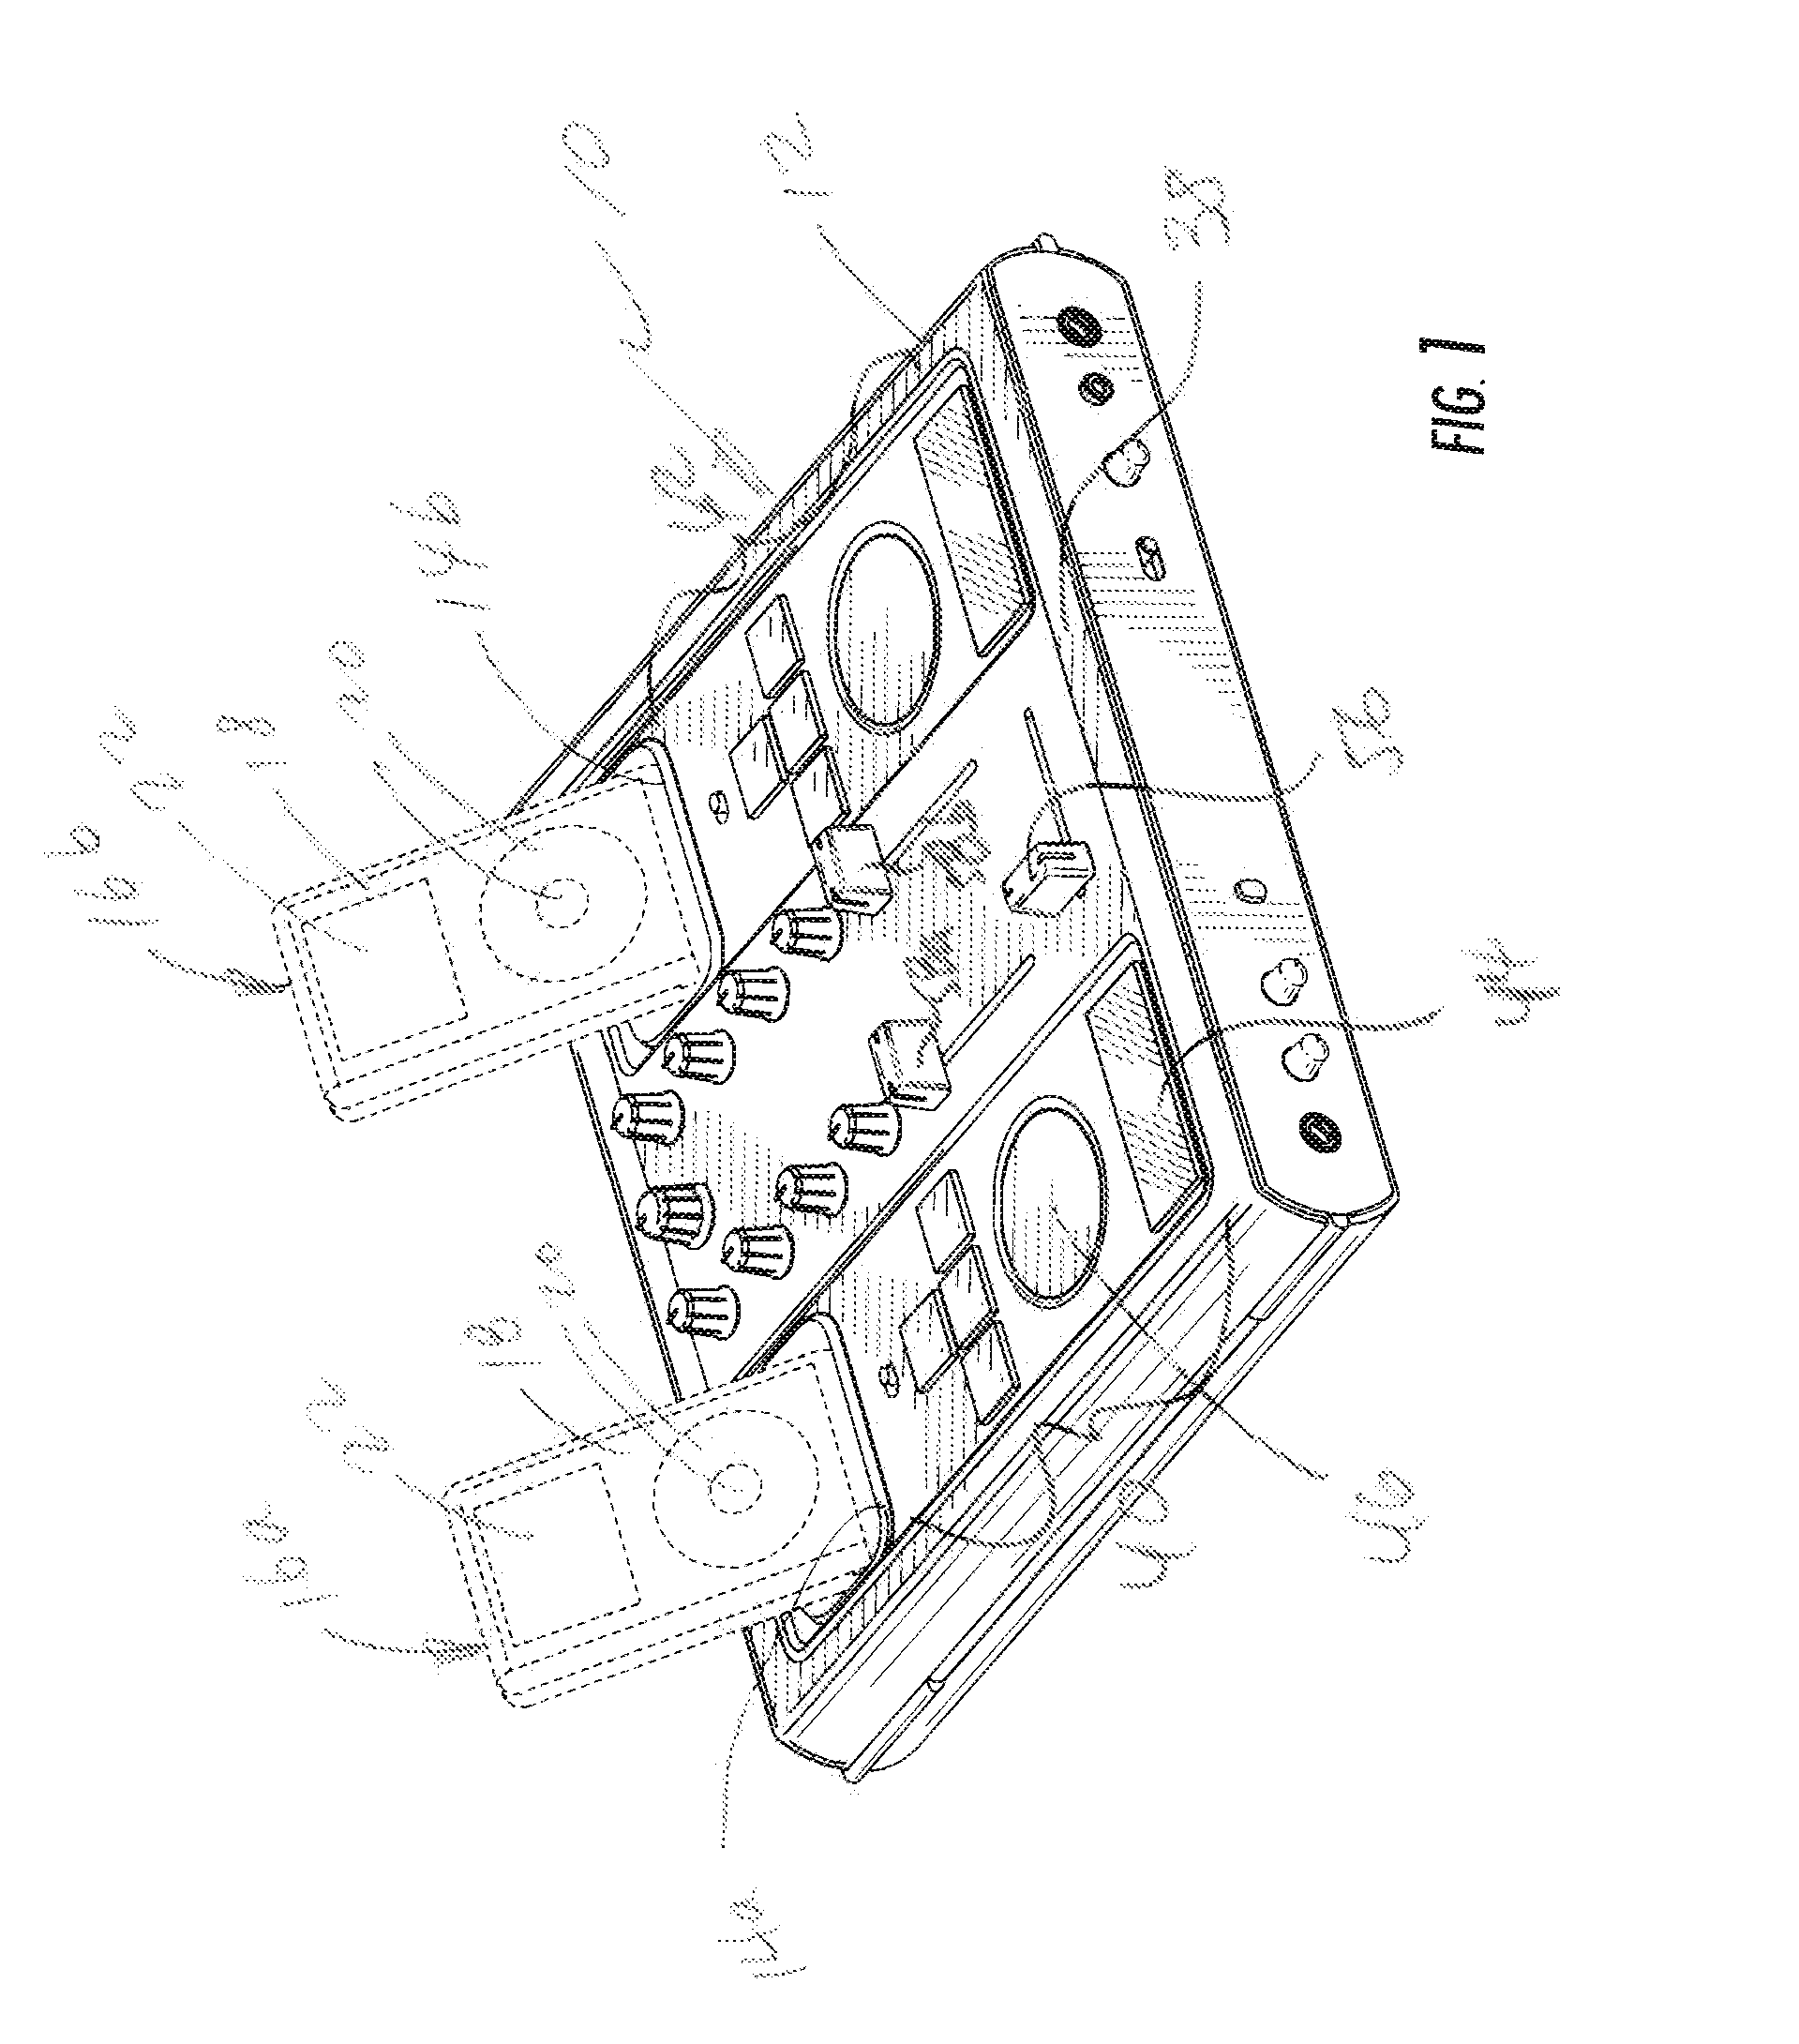 Docking apparatus and mixer for portable media devices